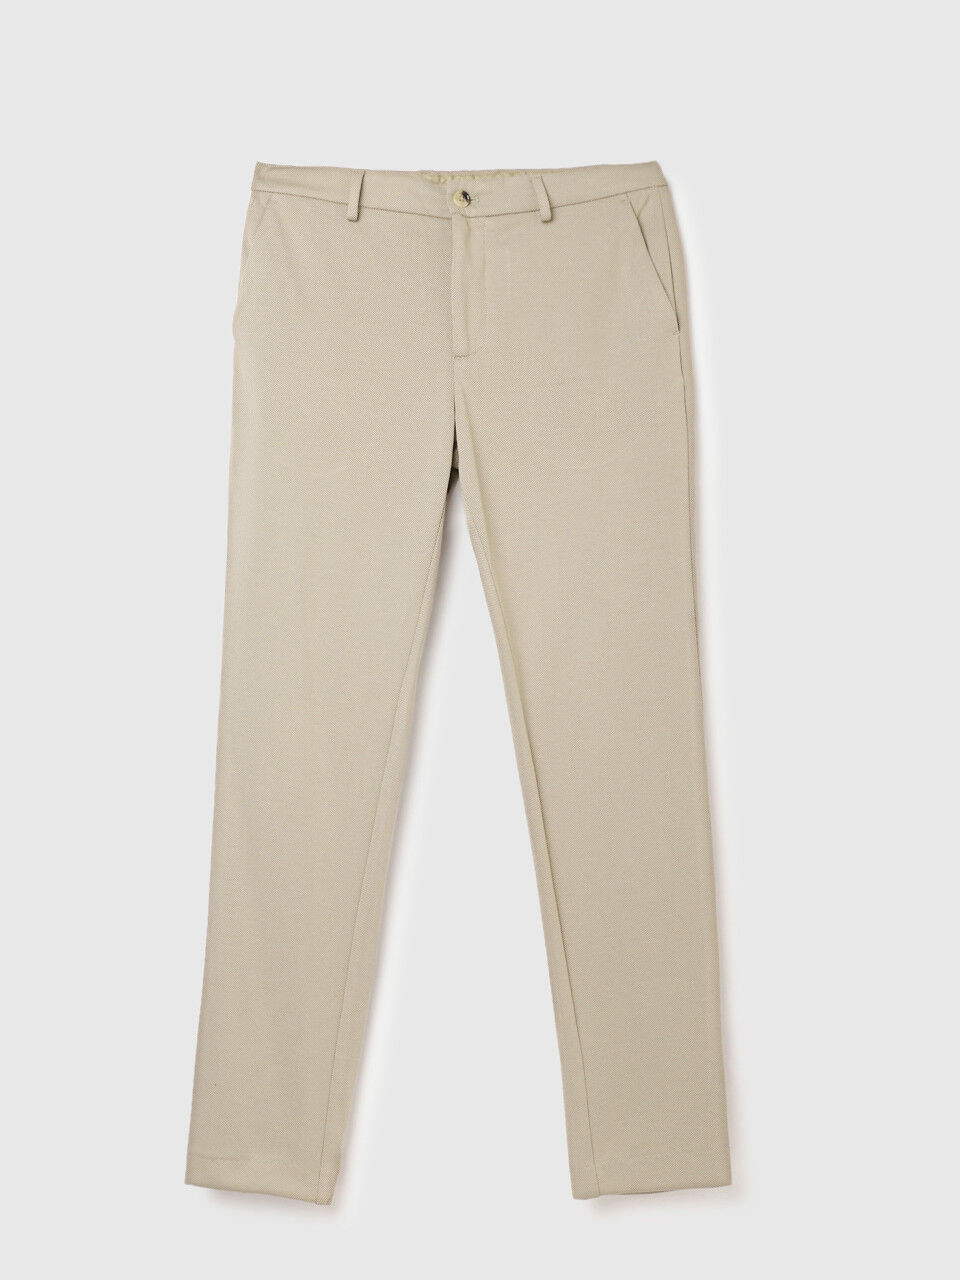 Buy Olive Trousers  Pants for Men by UNITED COLORS OF BENETTON Online   Ajiocom